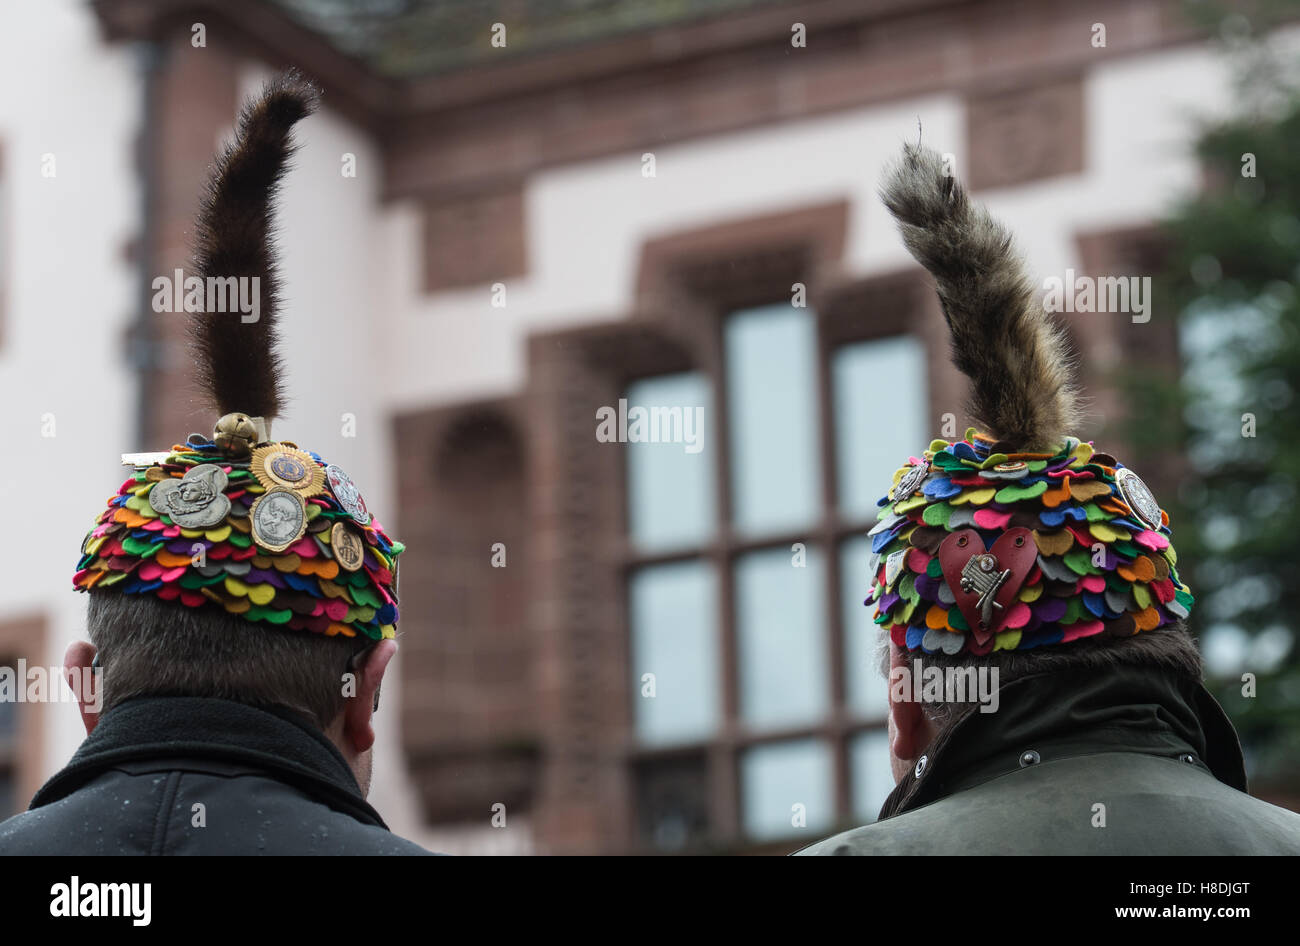 Freiburg, Germany. 11th Nov, 2016. Members of the Carnival club of Freiburg standing in front of the city hall during the traditional keg tapping in Freiburg, Germany, 11 November 2016. The carnivalists wear a colourful fool's hat with a cat's tail. PHOTO: PATRICK SEEGER/dpa/Alamy Live News Stock Photo